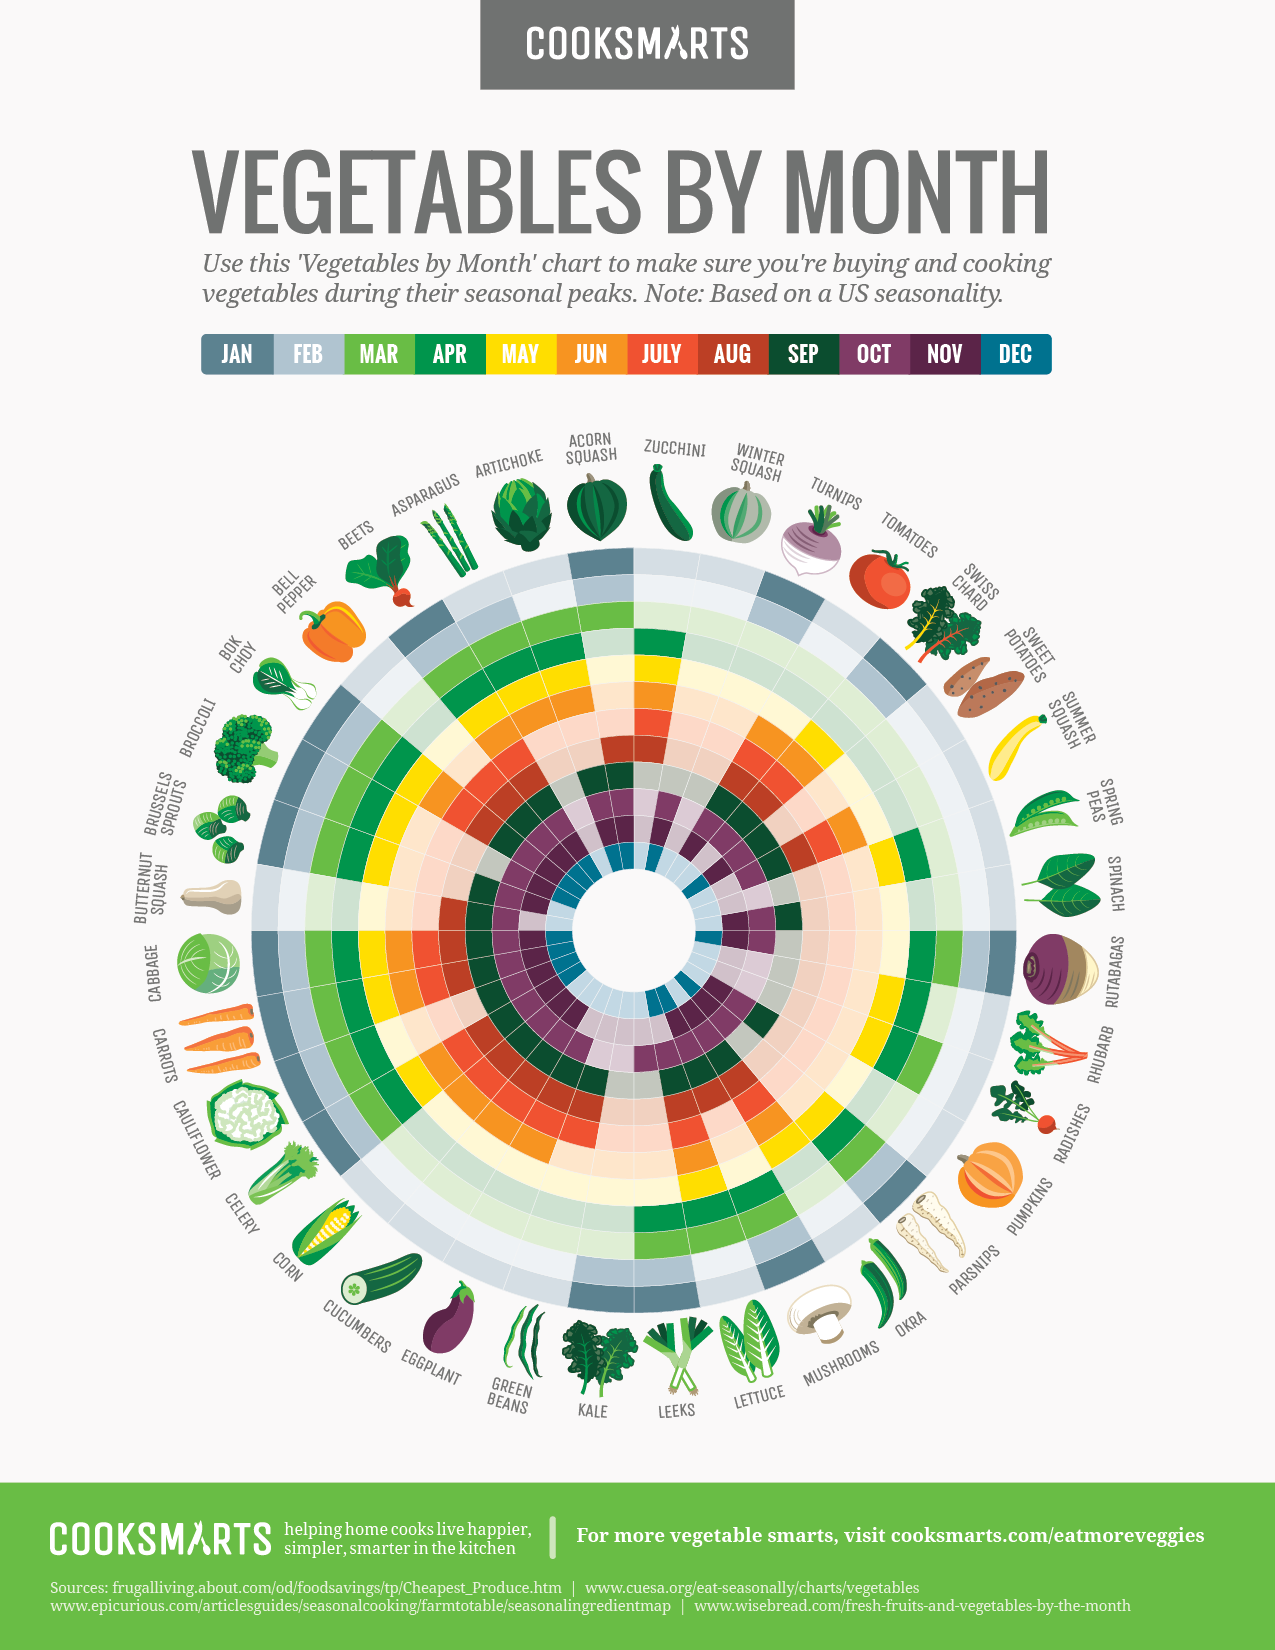 What Season Fruits And Vegetables Chart